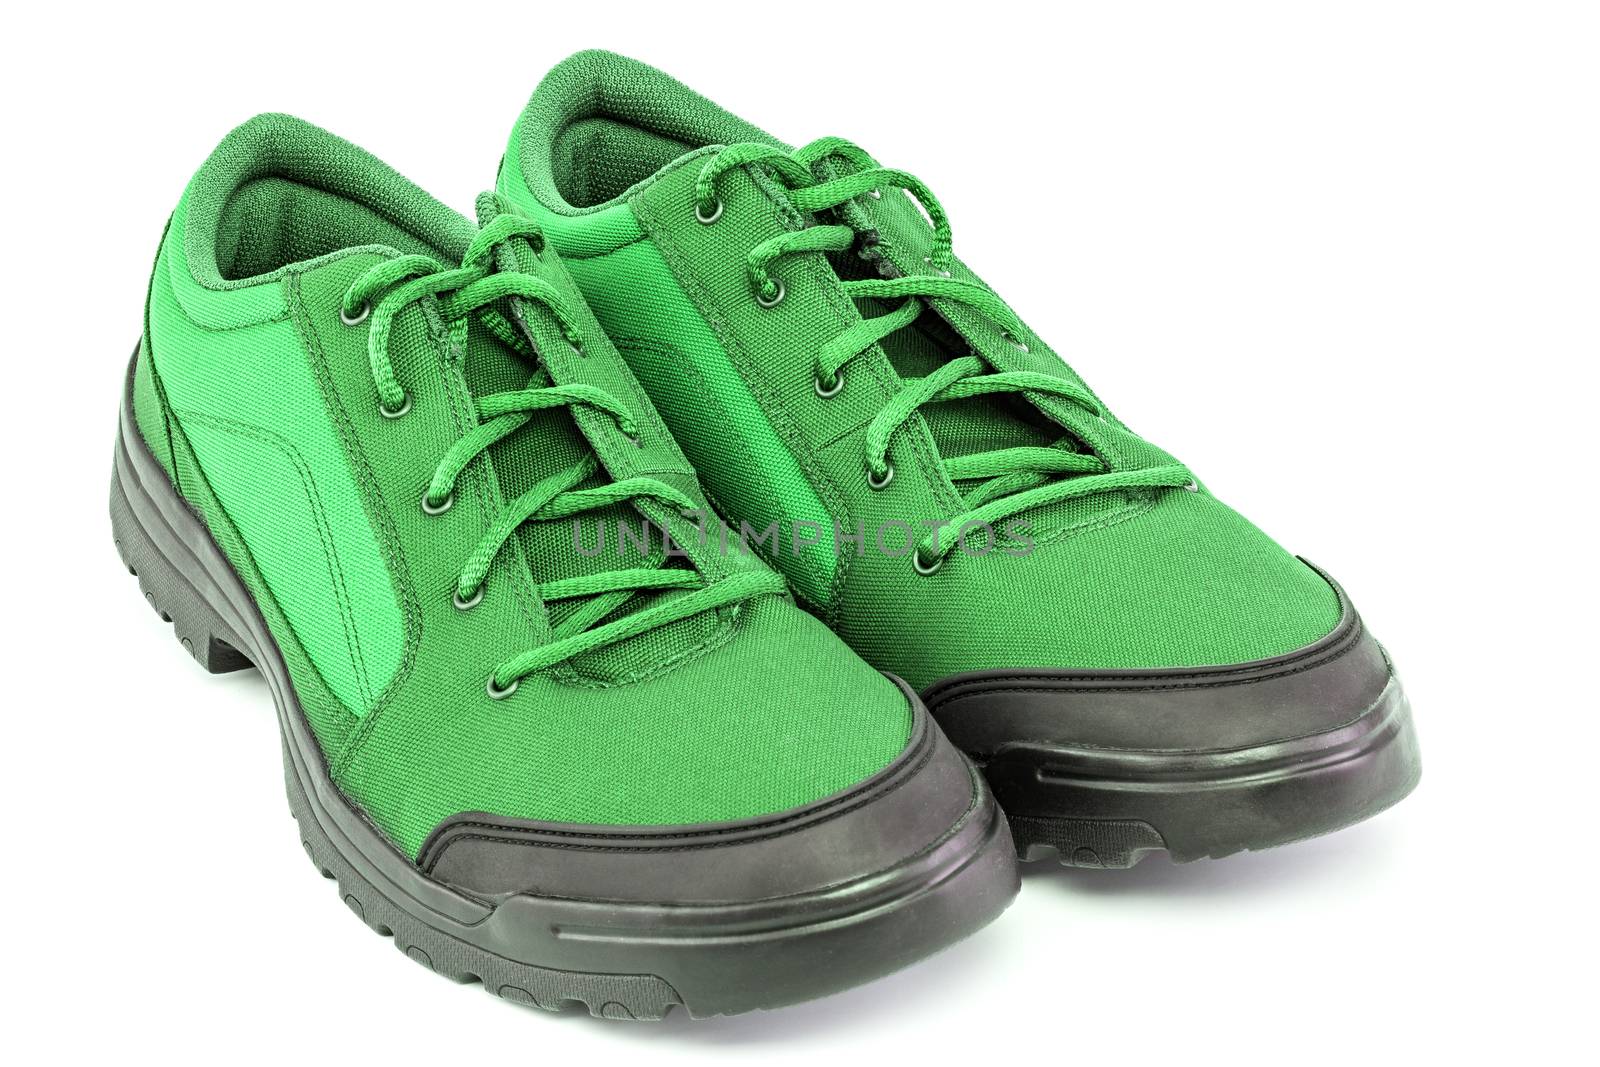 a pair of cheap light green hiking shoes isolated on white background - perspective close-up view by z1b